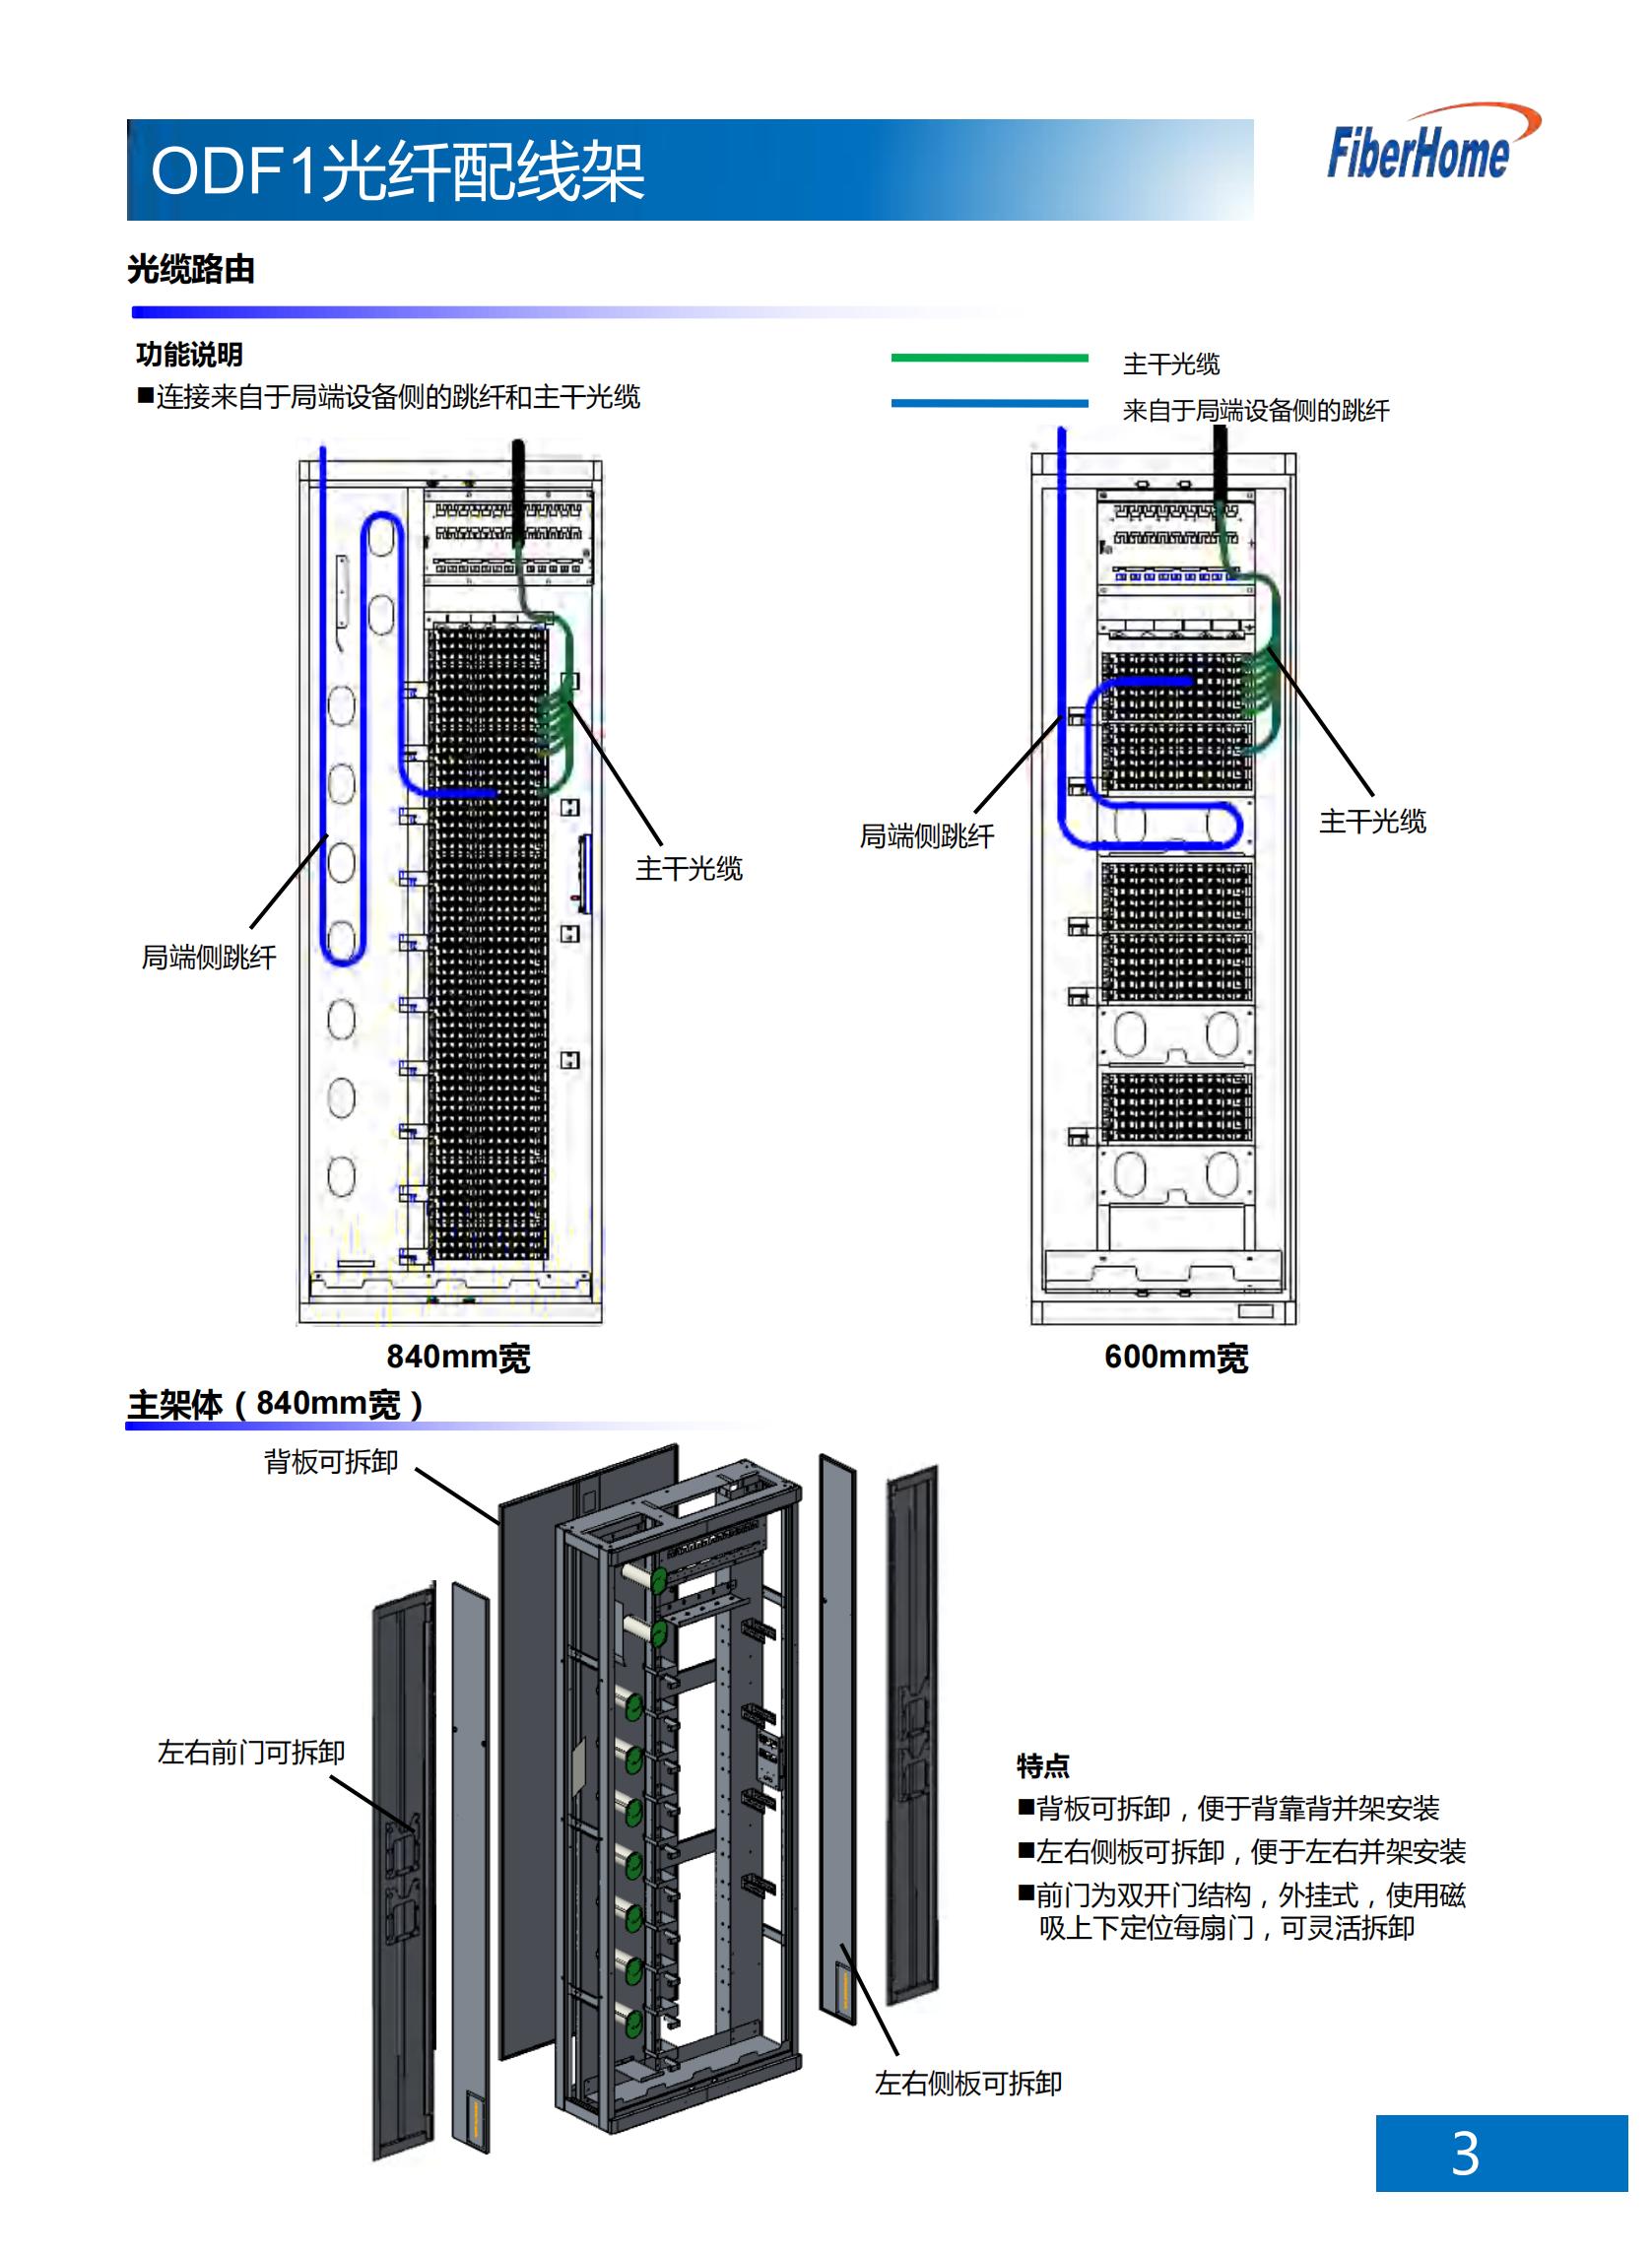 ODF101-576-A3-FC ODF optical fiber distribution frame (576-core floor type without sub-frame type, all of which include 12-core FC fusion and distribution integrated unit)